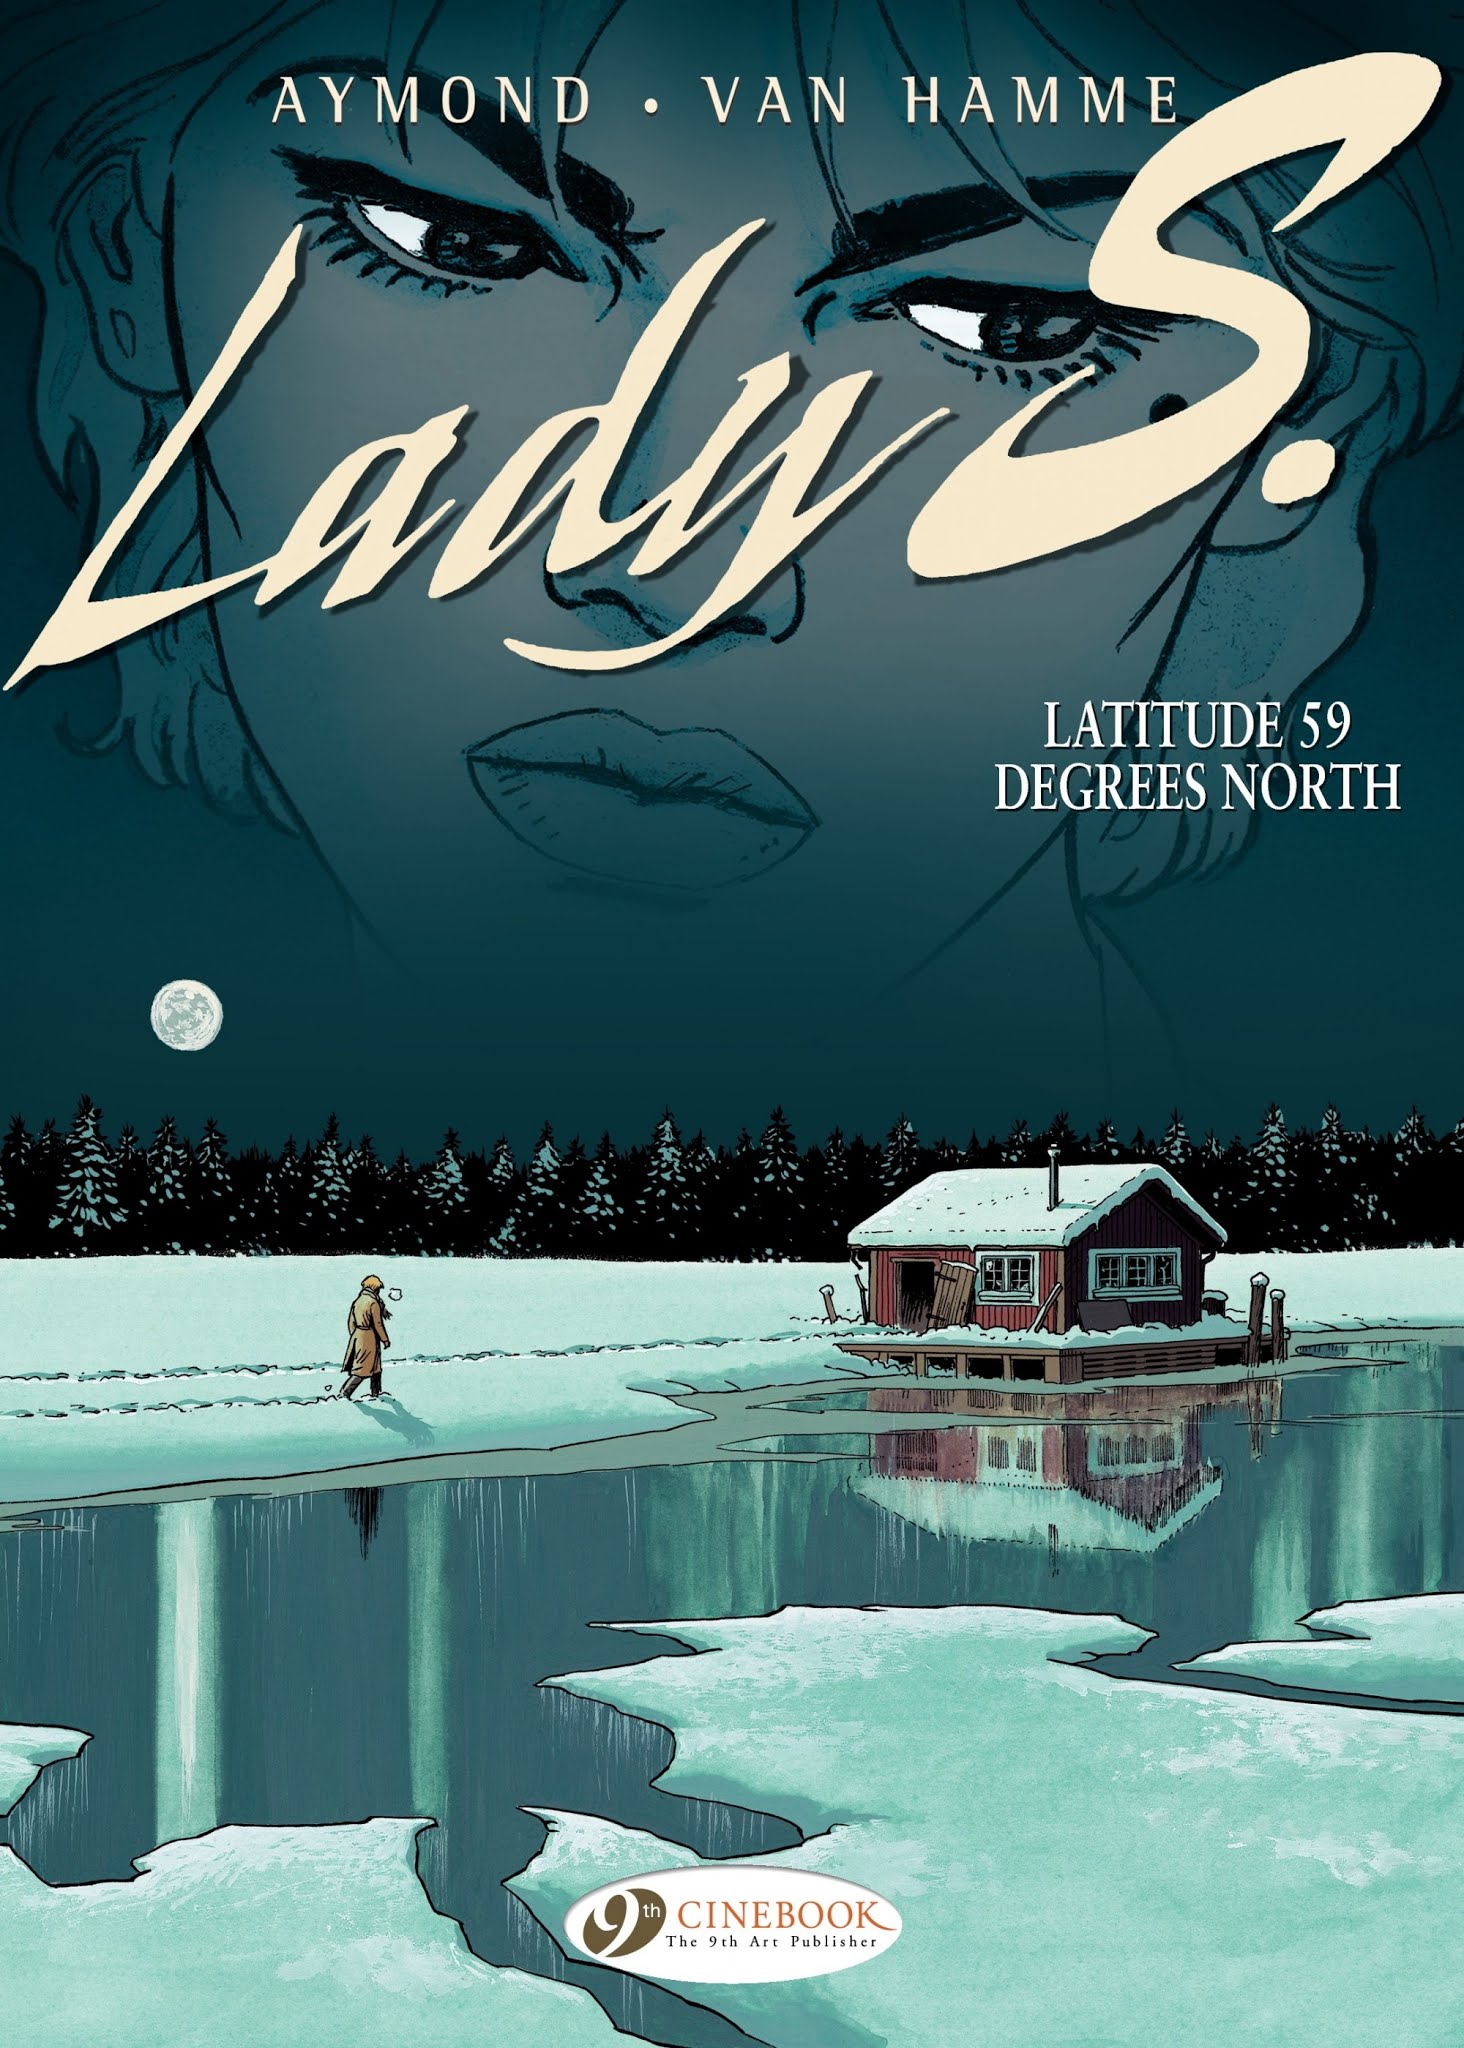 Read online Lady S. comic -  Issue # TPB 2 - 1